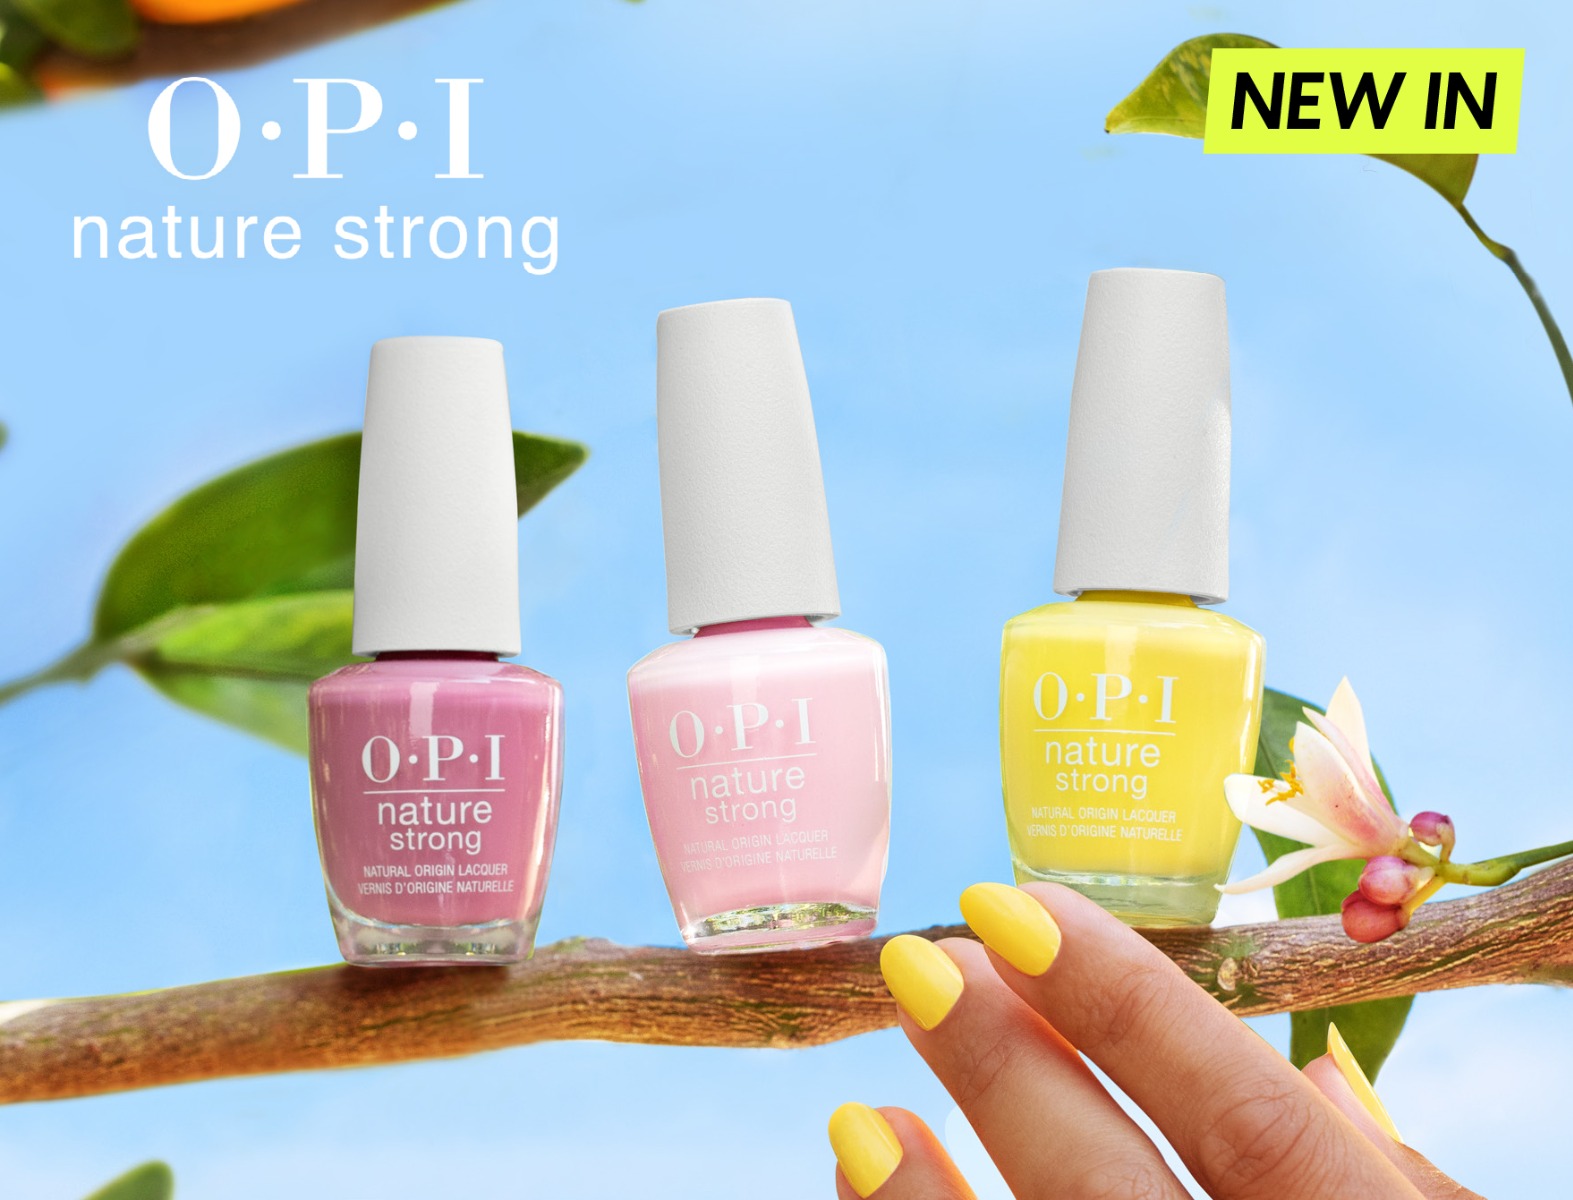 OPI Nature Strong